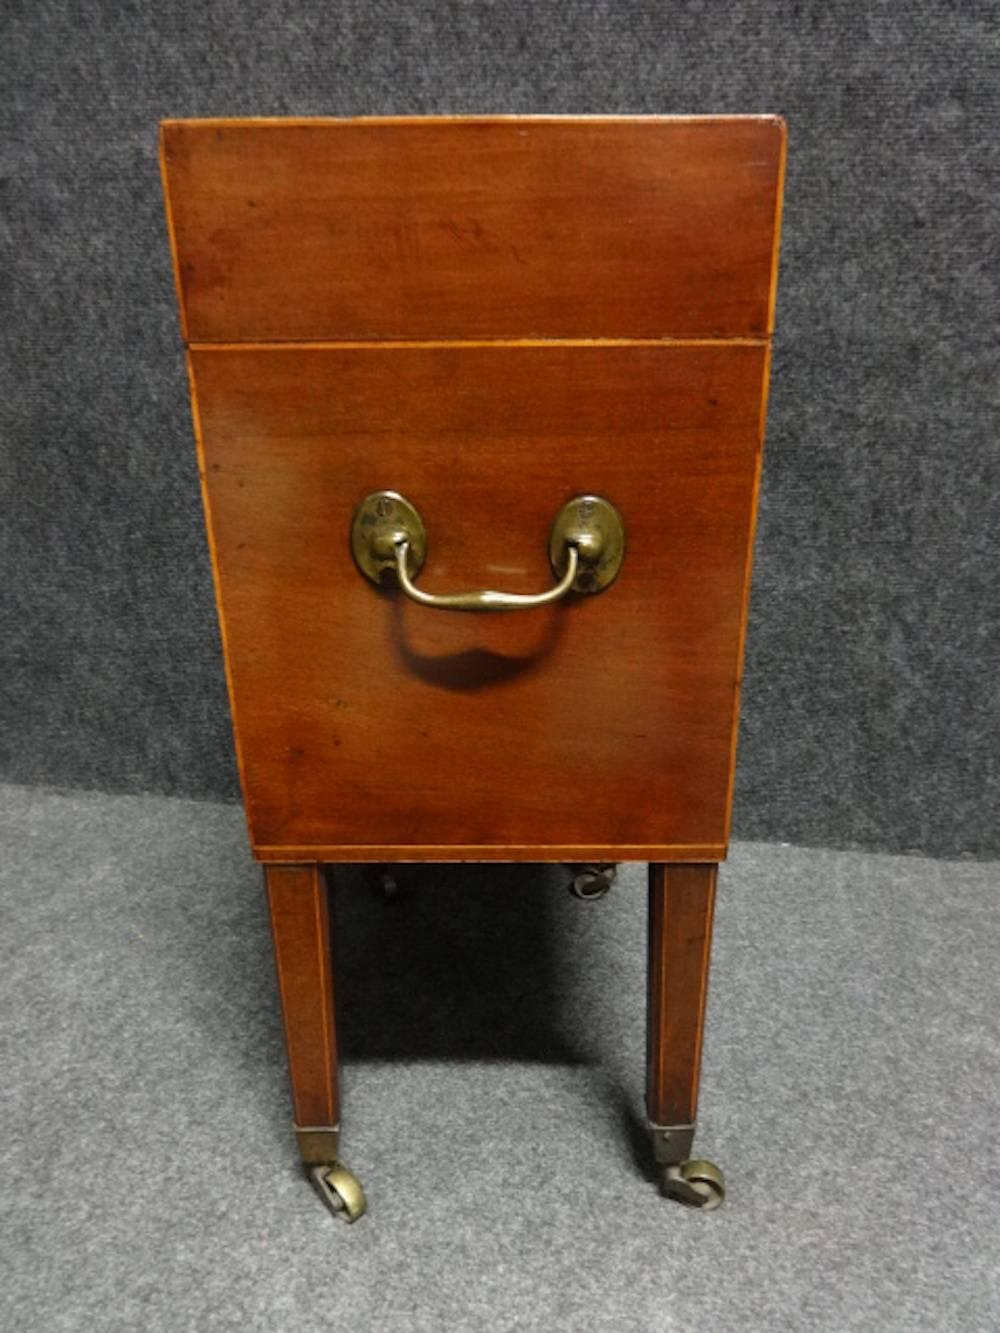 A very good Georgian mahogany cellaret, inlaid to all sides with boxwood, with a boxwood lozenge escution, sectioned for six bottles with brass carry handles and brass cup castors, original lock with key, and in excellent original condition.